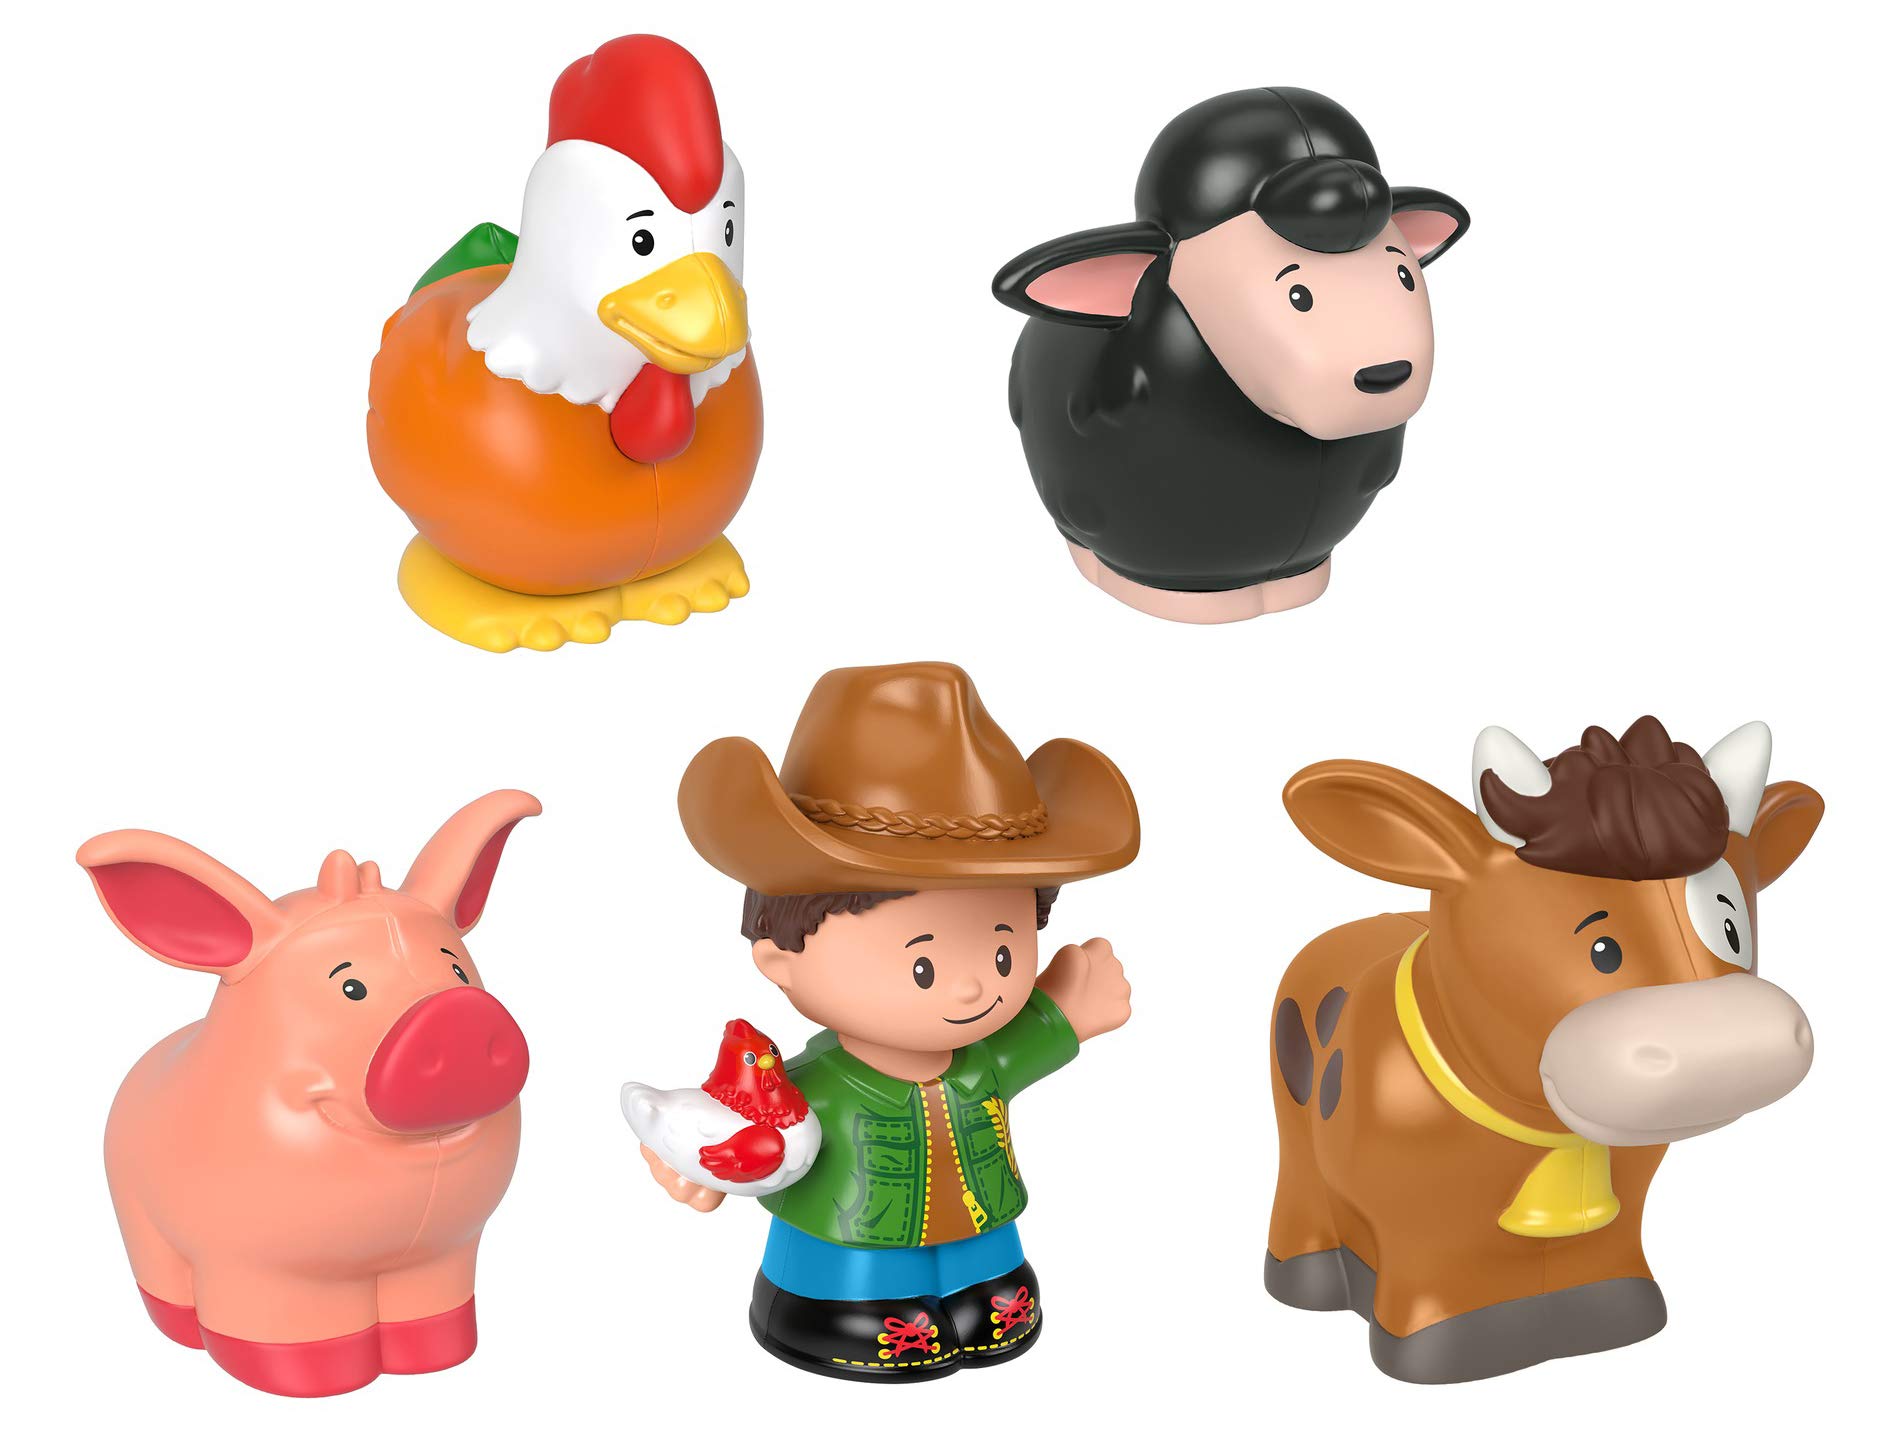 Fisher-Price Little People Farmer & Animals Figure Pack